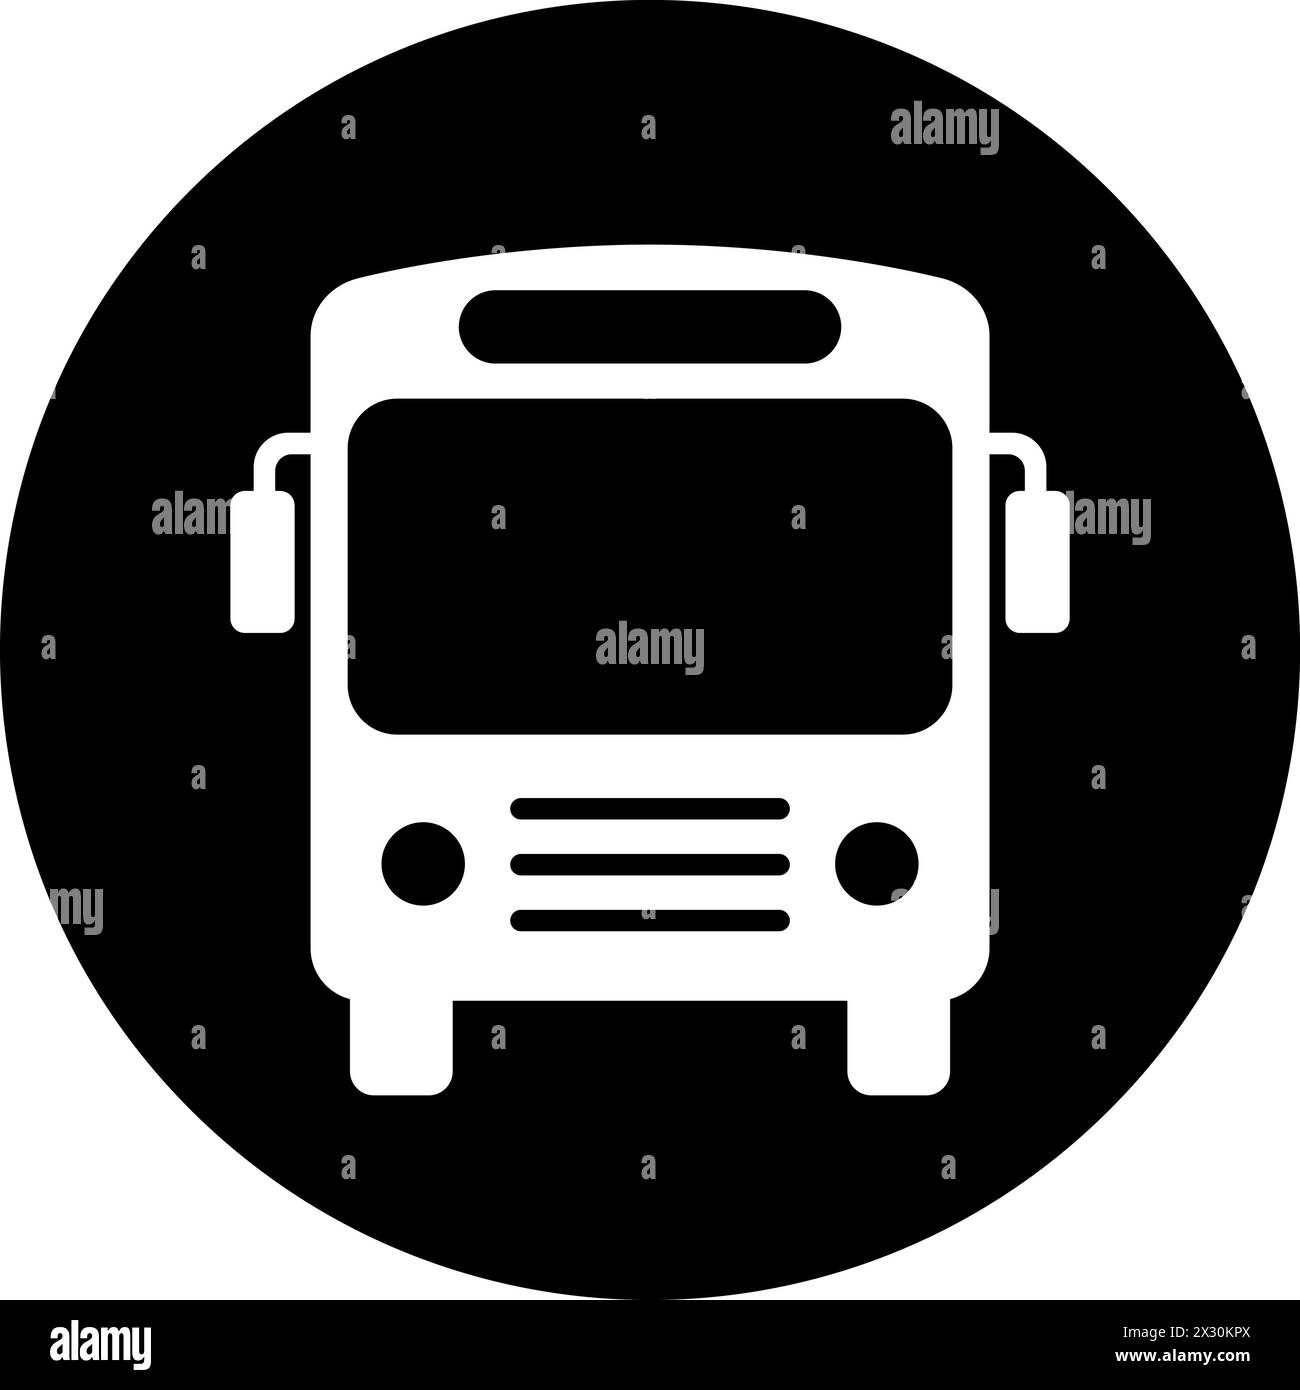 Bus icon as symbol for web page design Stock Vector